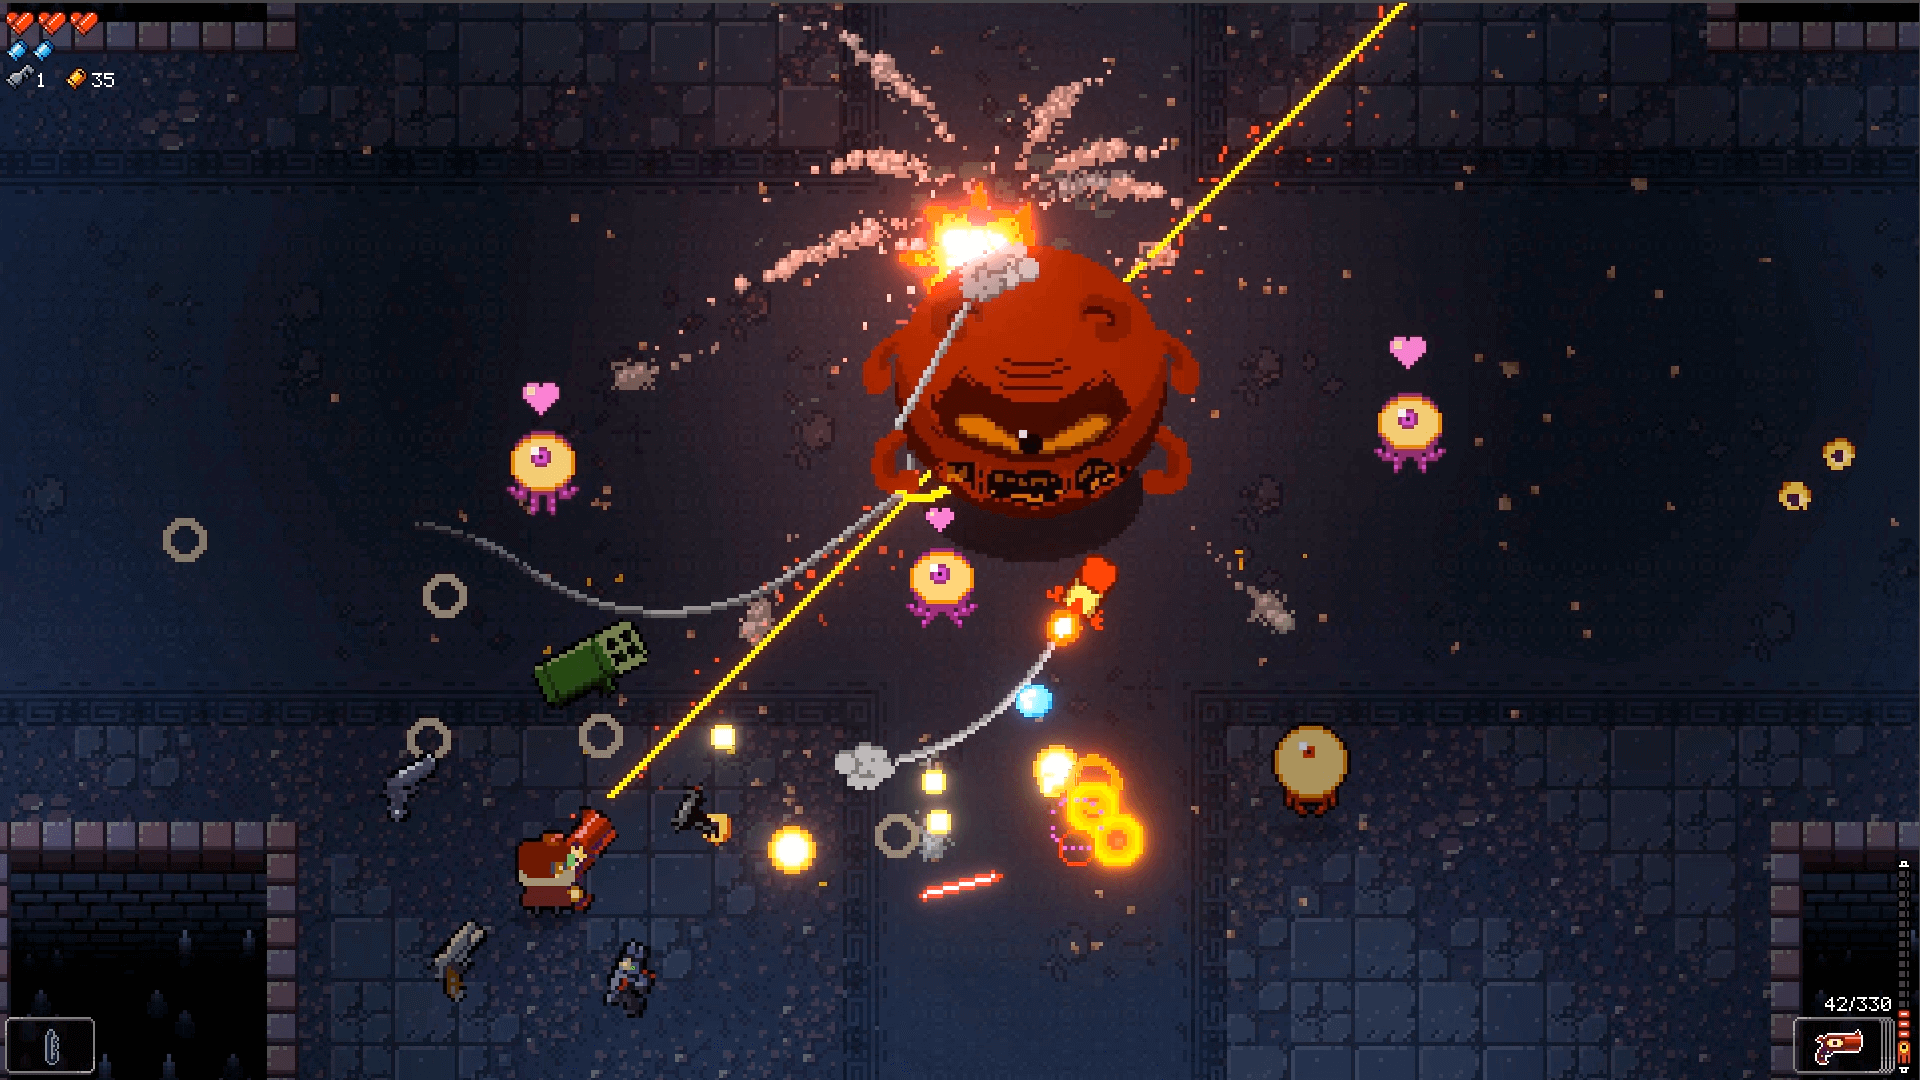 http://www.cosmocover.com/wp-content/uploads/2019/03/Enter-the-Gungeon-FTA-Screen-8.png